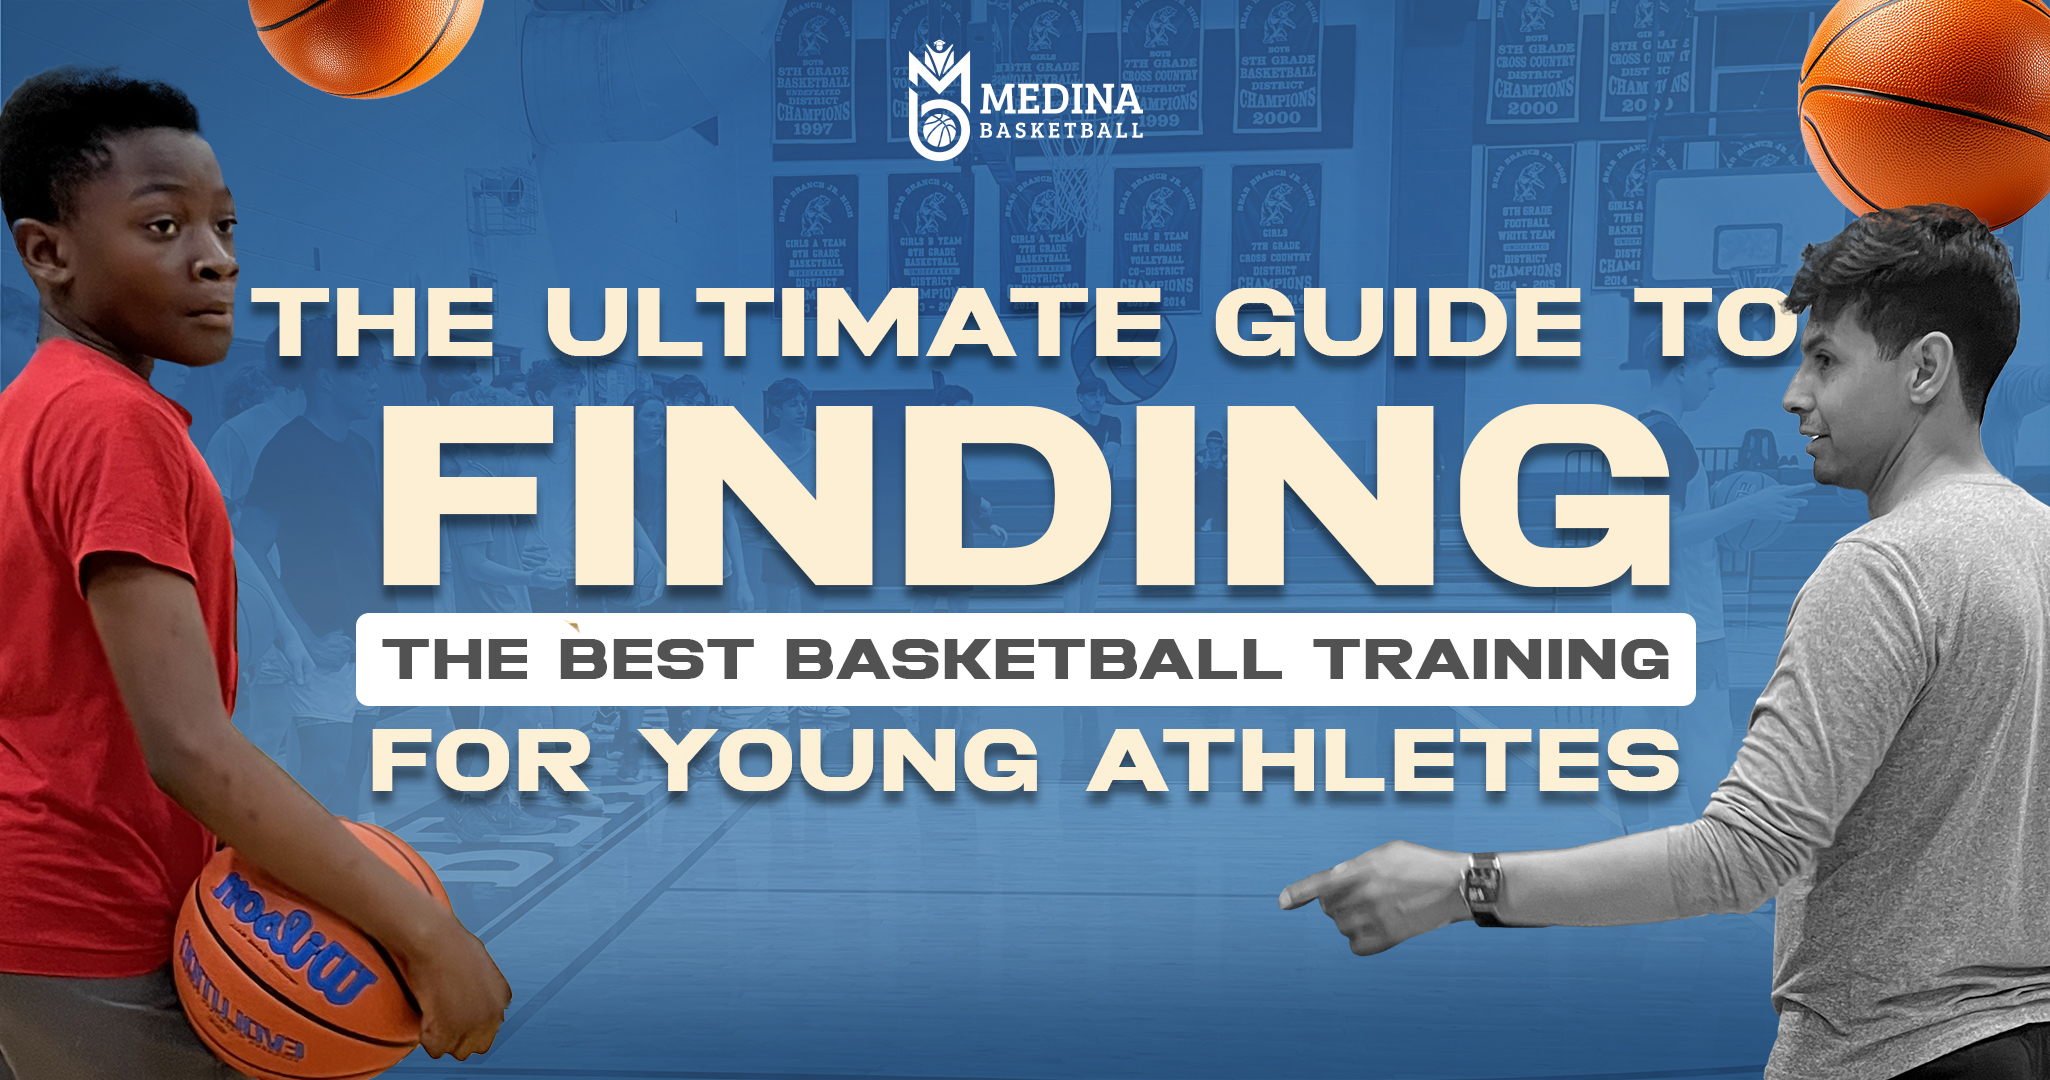 Guide to Finding the Best Basketball Training for Young Athletes